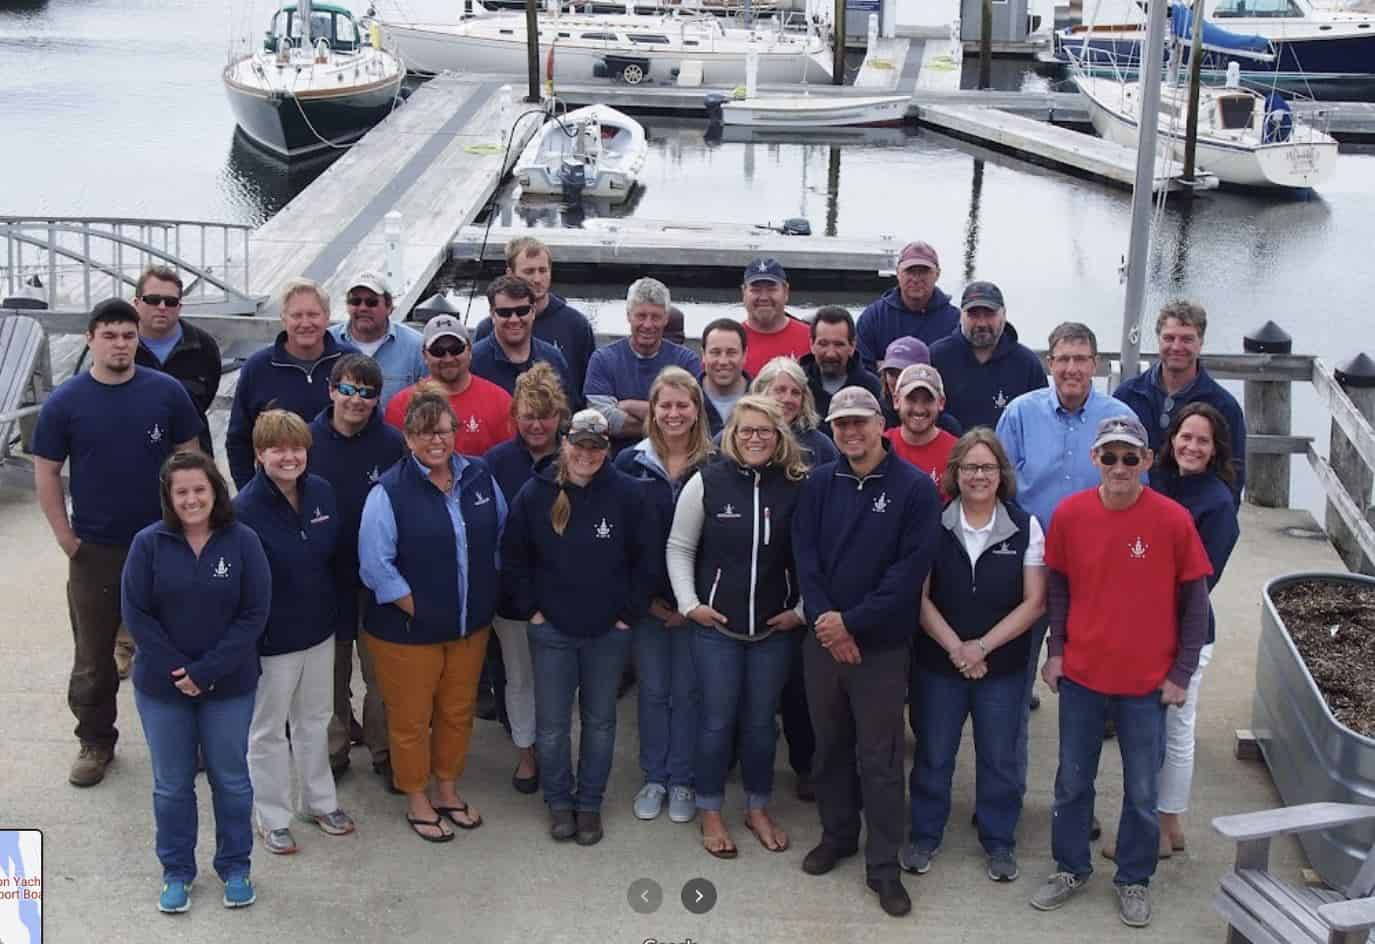 Staff of Hodgdon Yacht Services clustered on a dock.